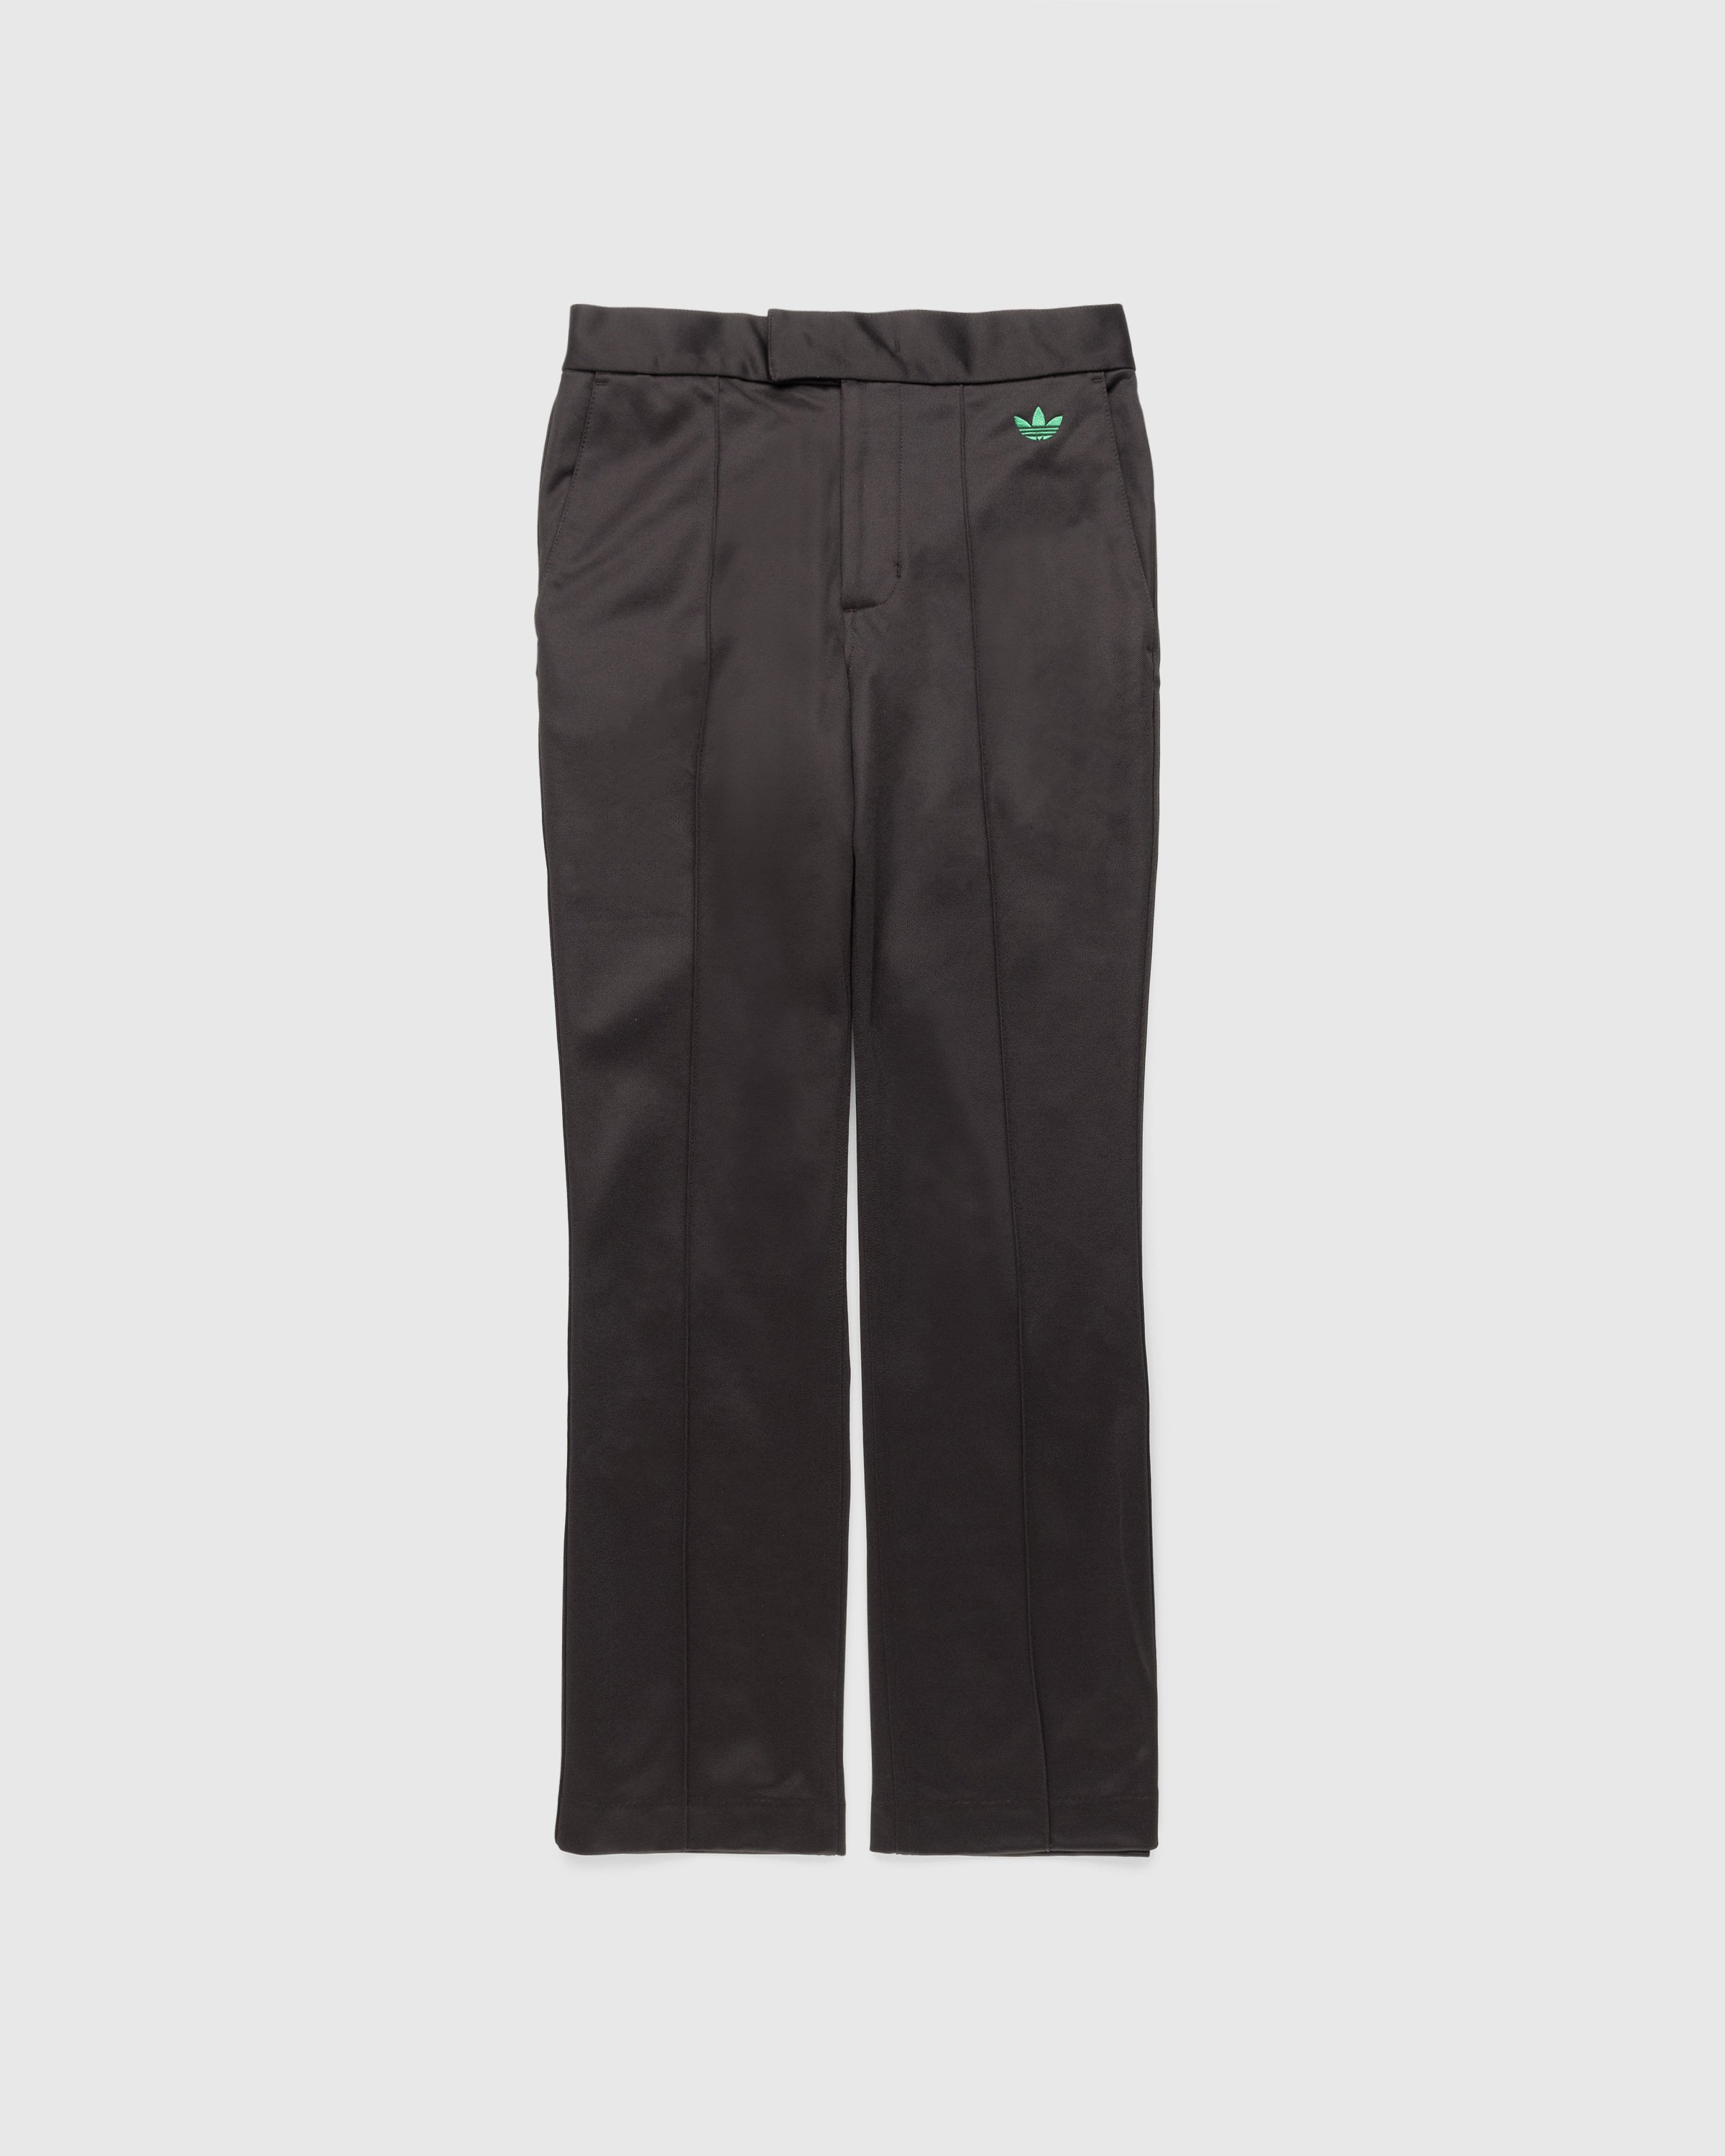 Adidas x Wales Bonner - Flared Trousers Night Brown - Clothing - Brown - Image 1